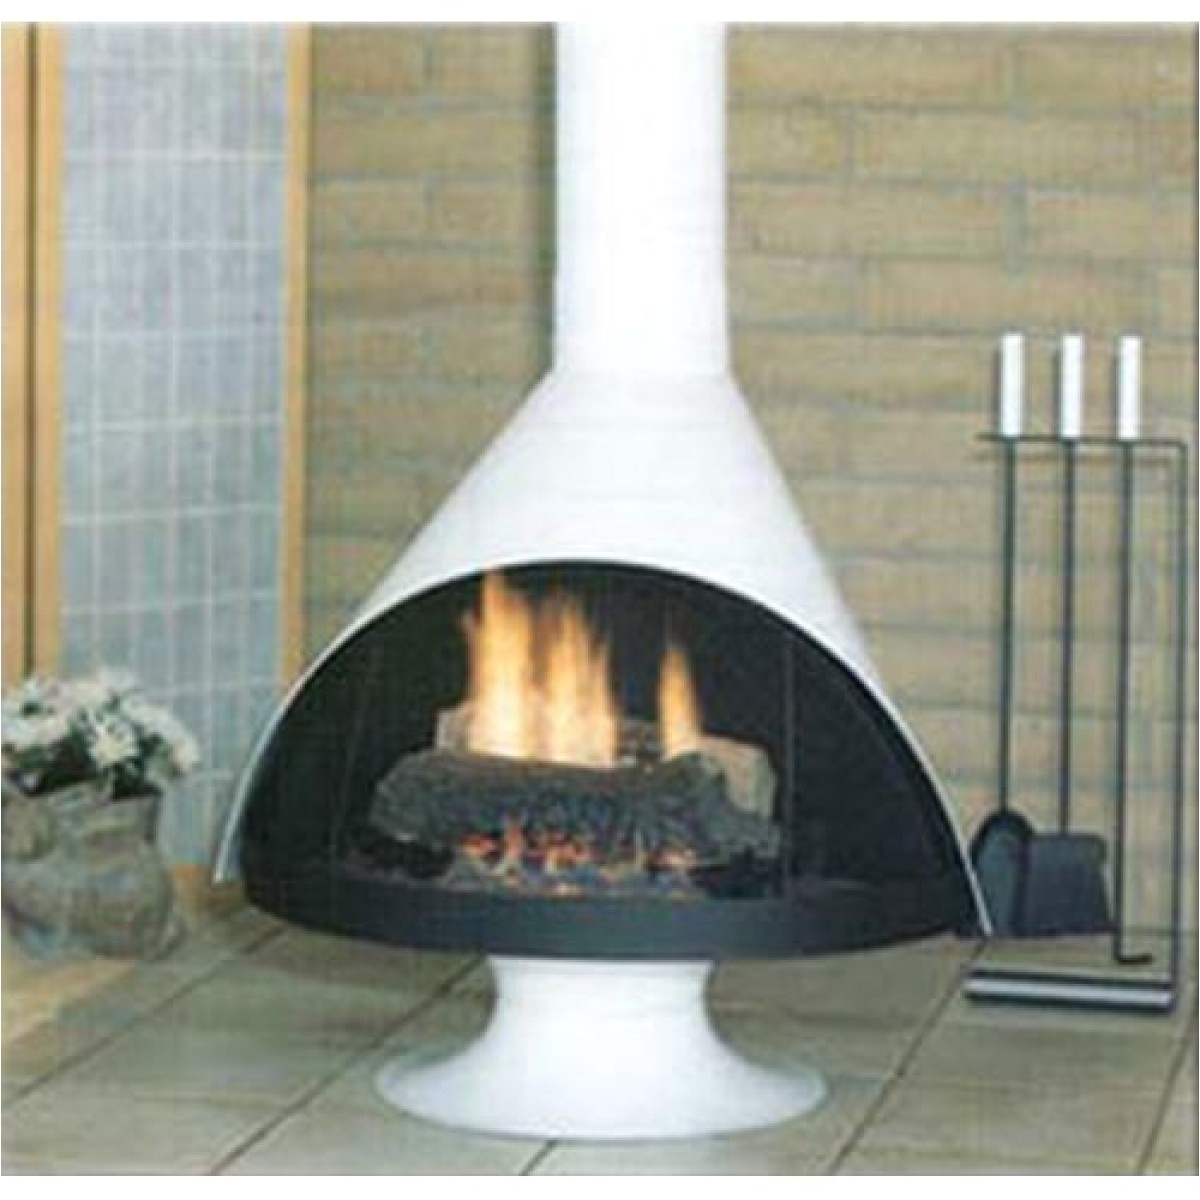 Preway Fireplace for Sale Malm Zircon 34 Inch Wood Burning or Gas Fireplace In Matte Black or